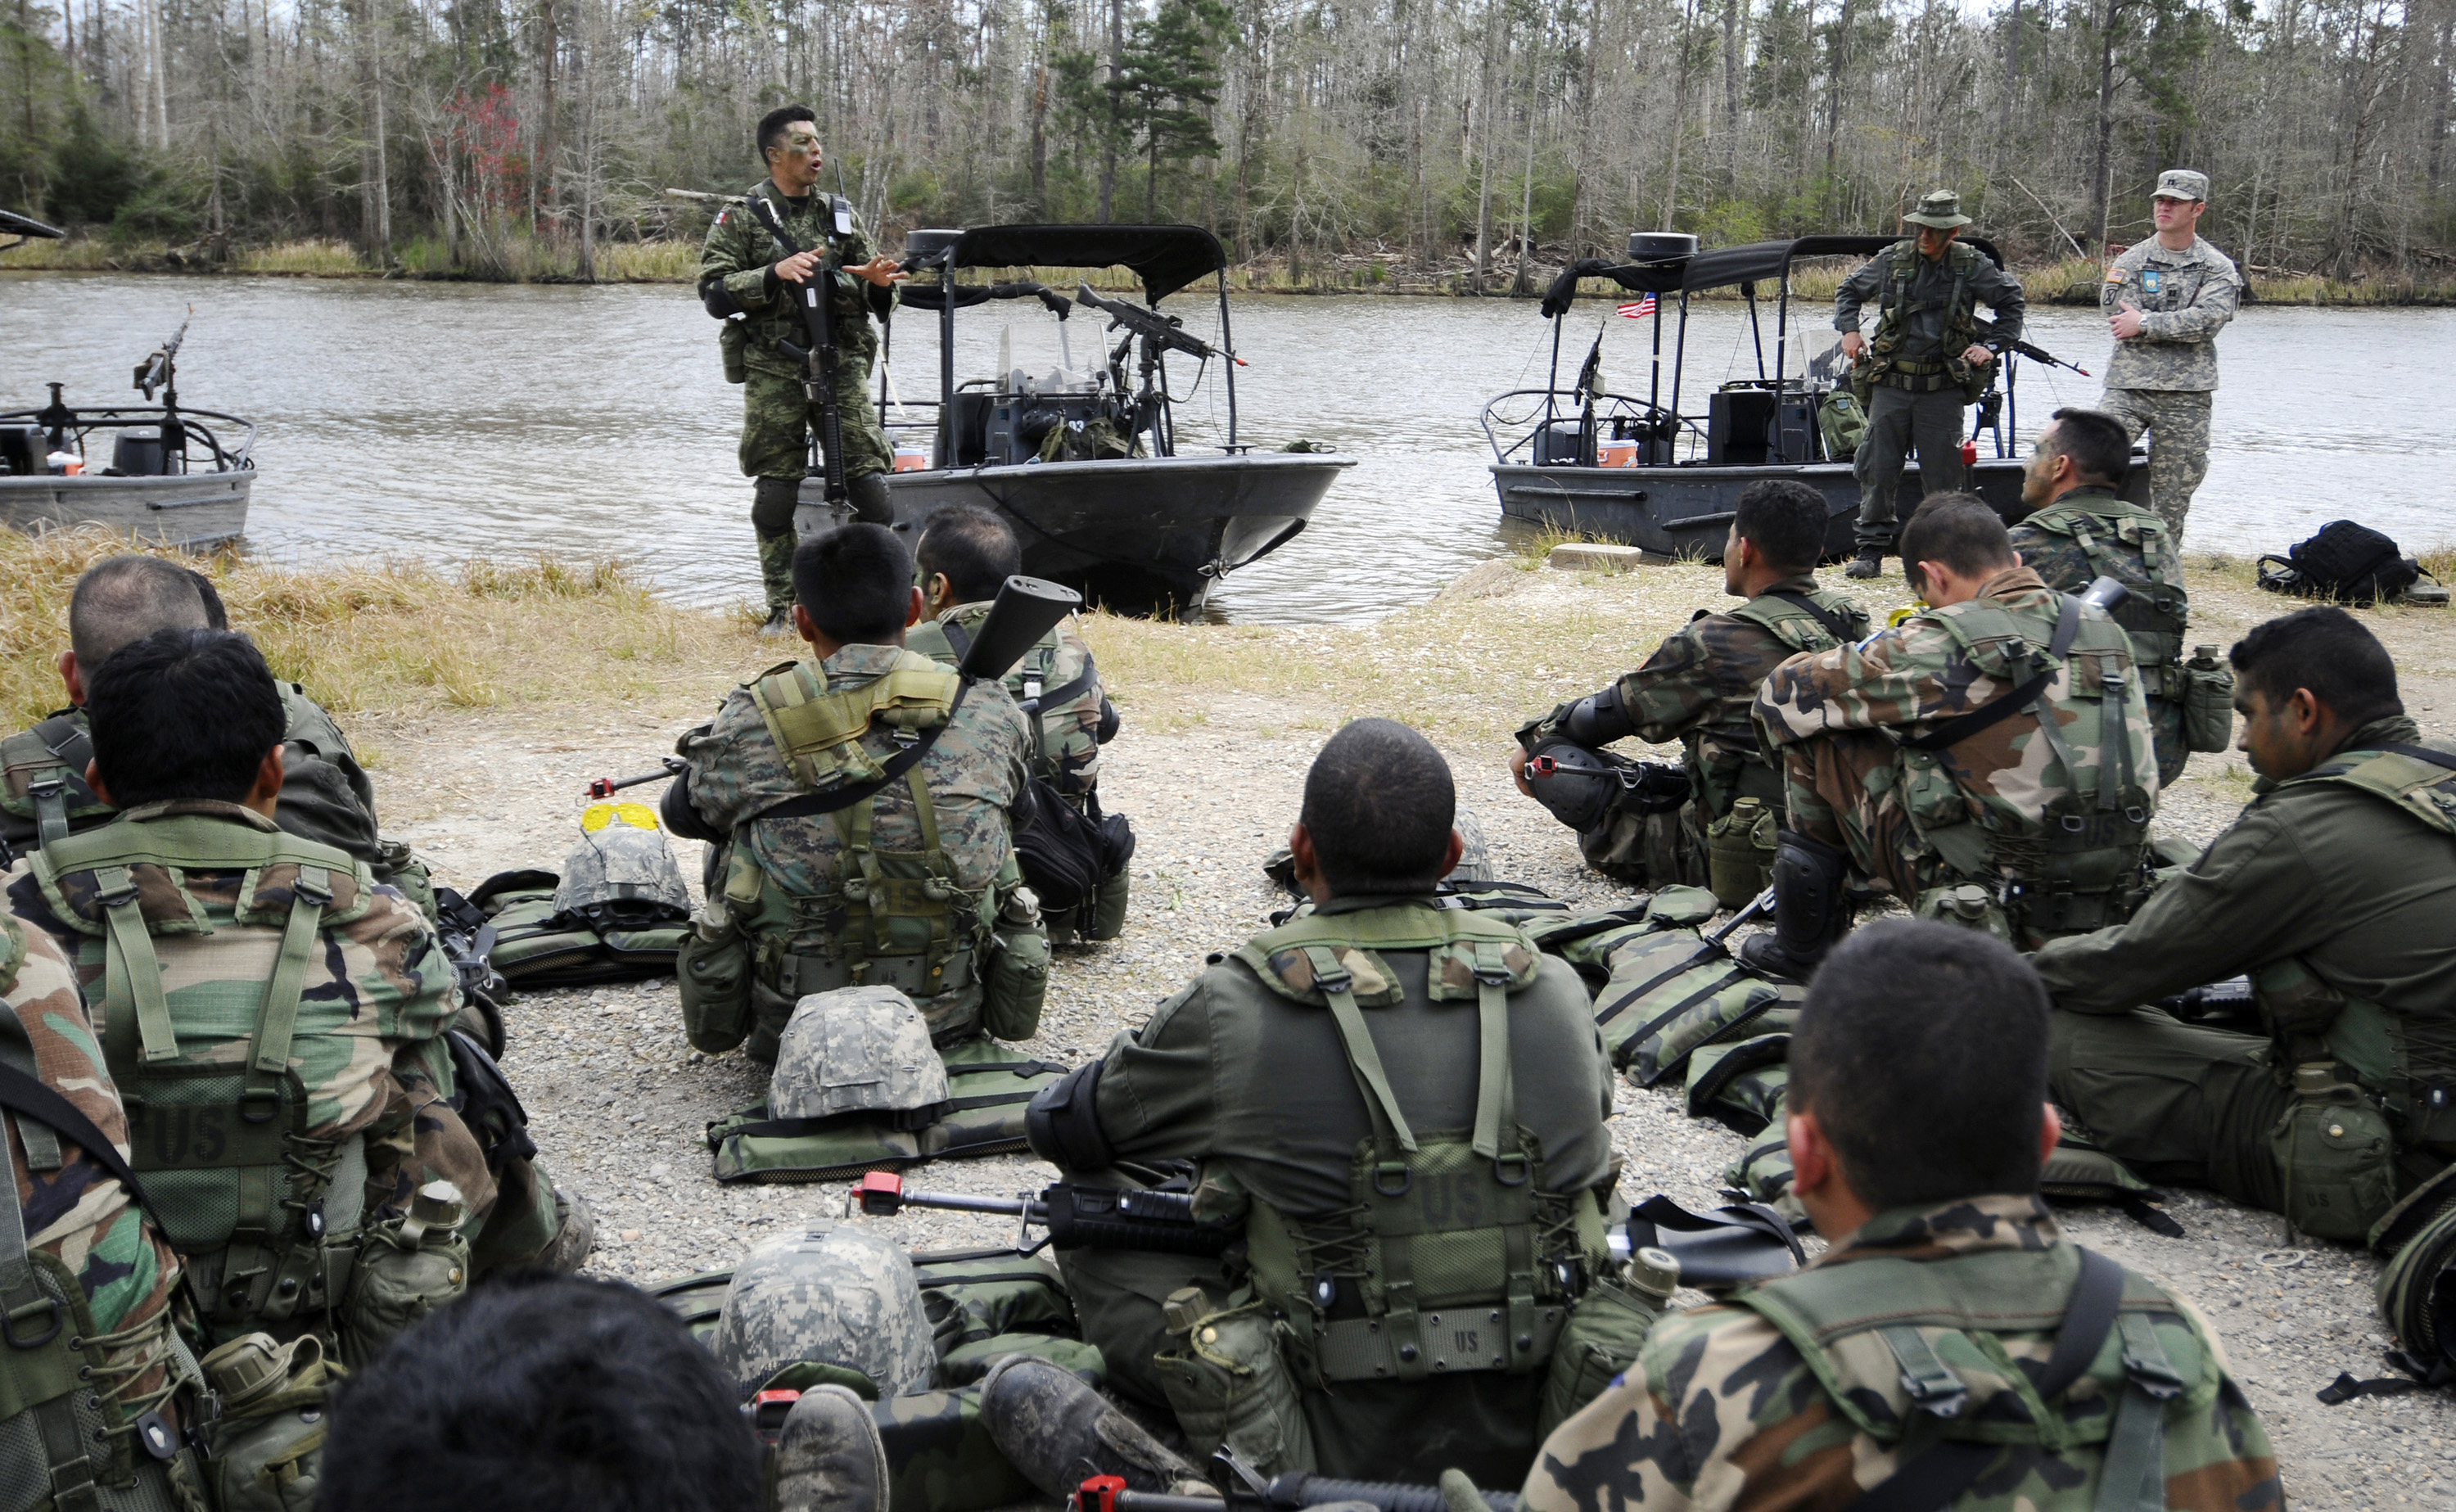 A guest instructor debriefs students from the Western Hemisphere Institute for Security Cooperation and Naval Small Craft Instruction and Technical Training School after a field training exercise. (U.S. Navy photo)